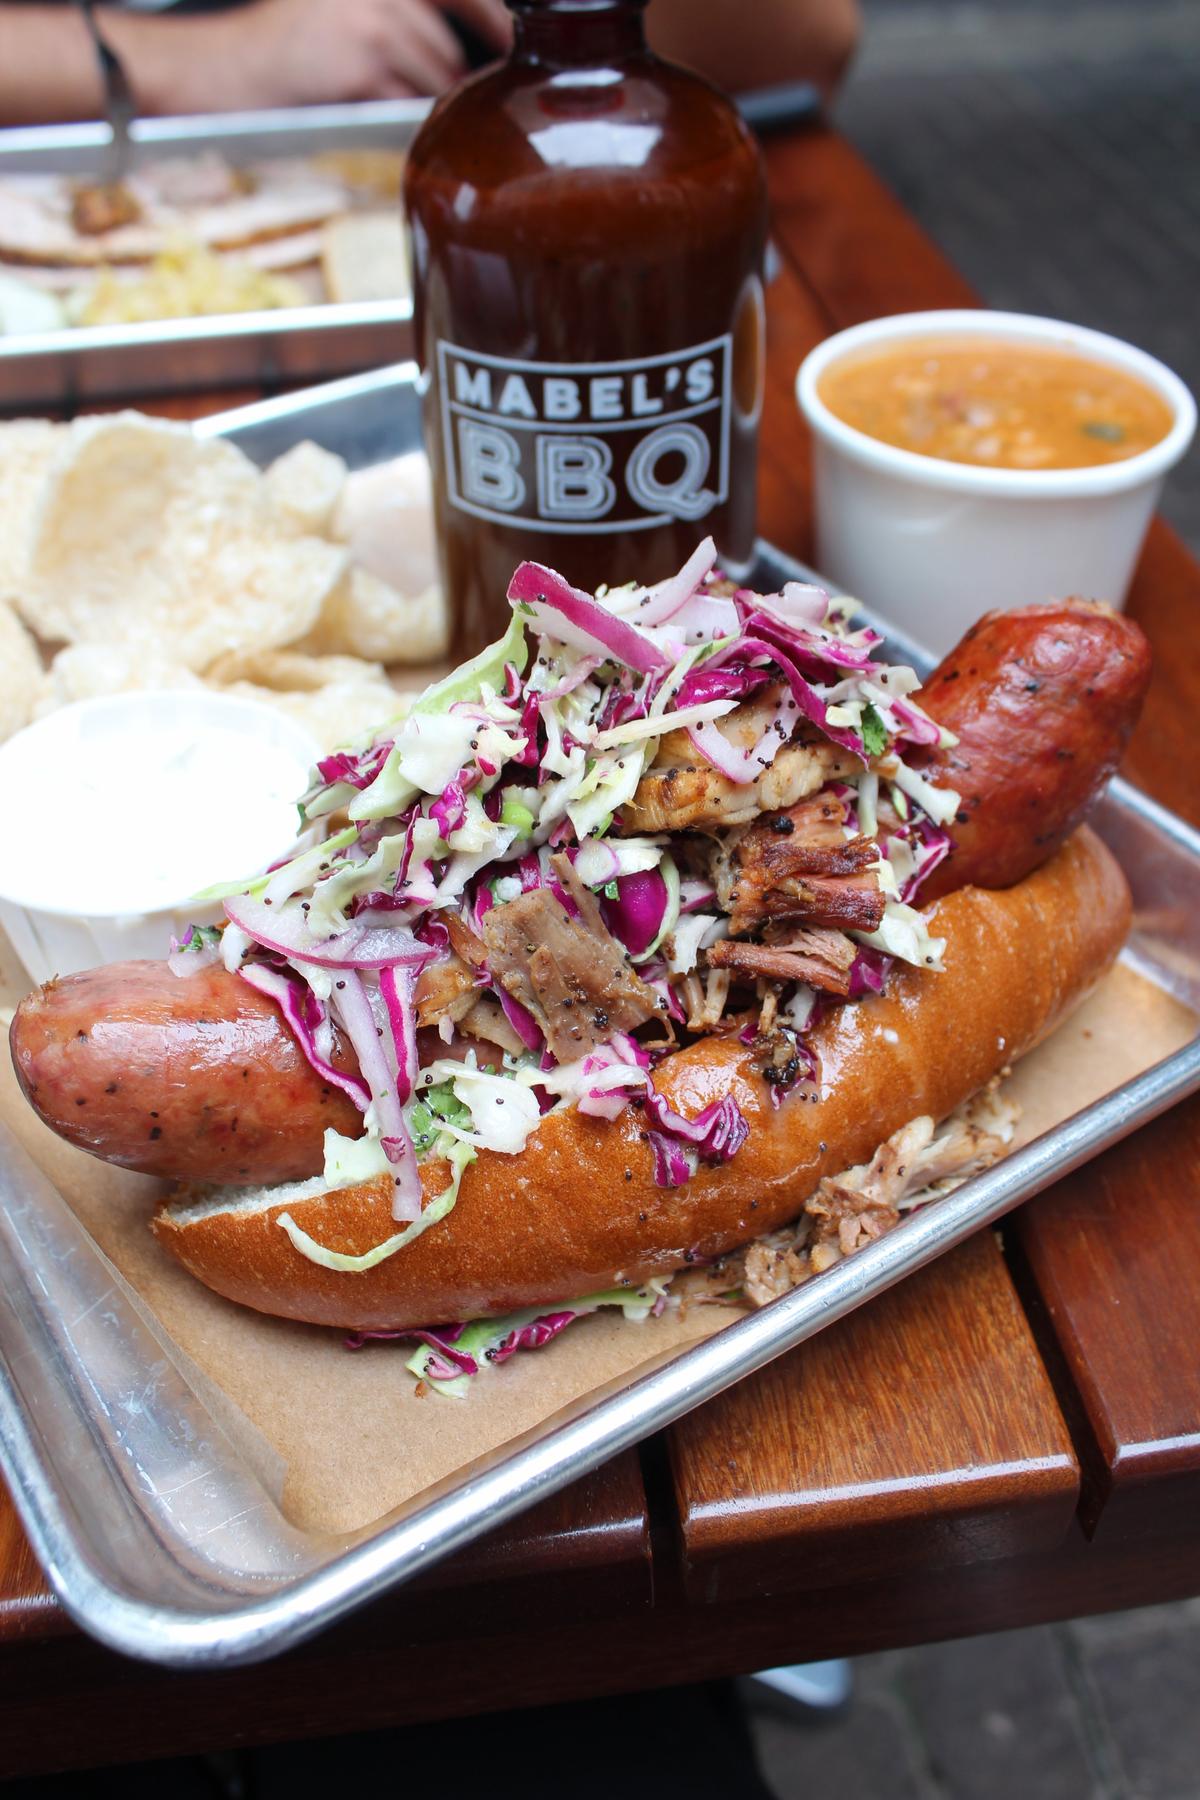 The Polish Girl at Mabel's BBQ replaces the fries with pulled pork. (Courtesy of Destination Cleveland)